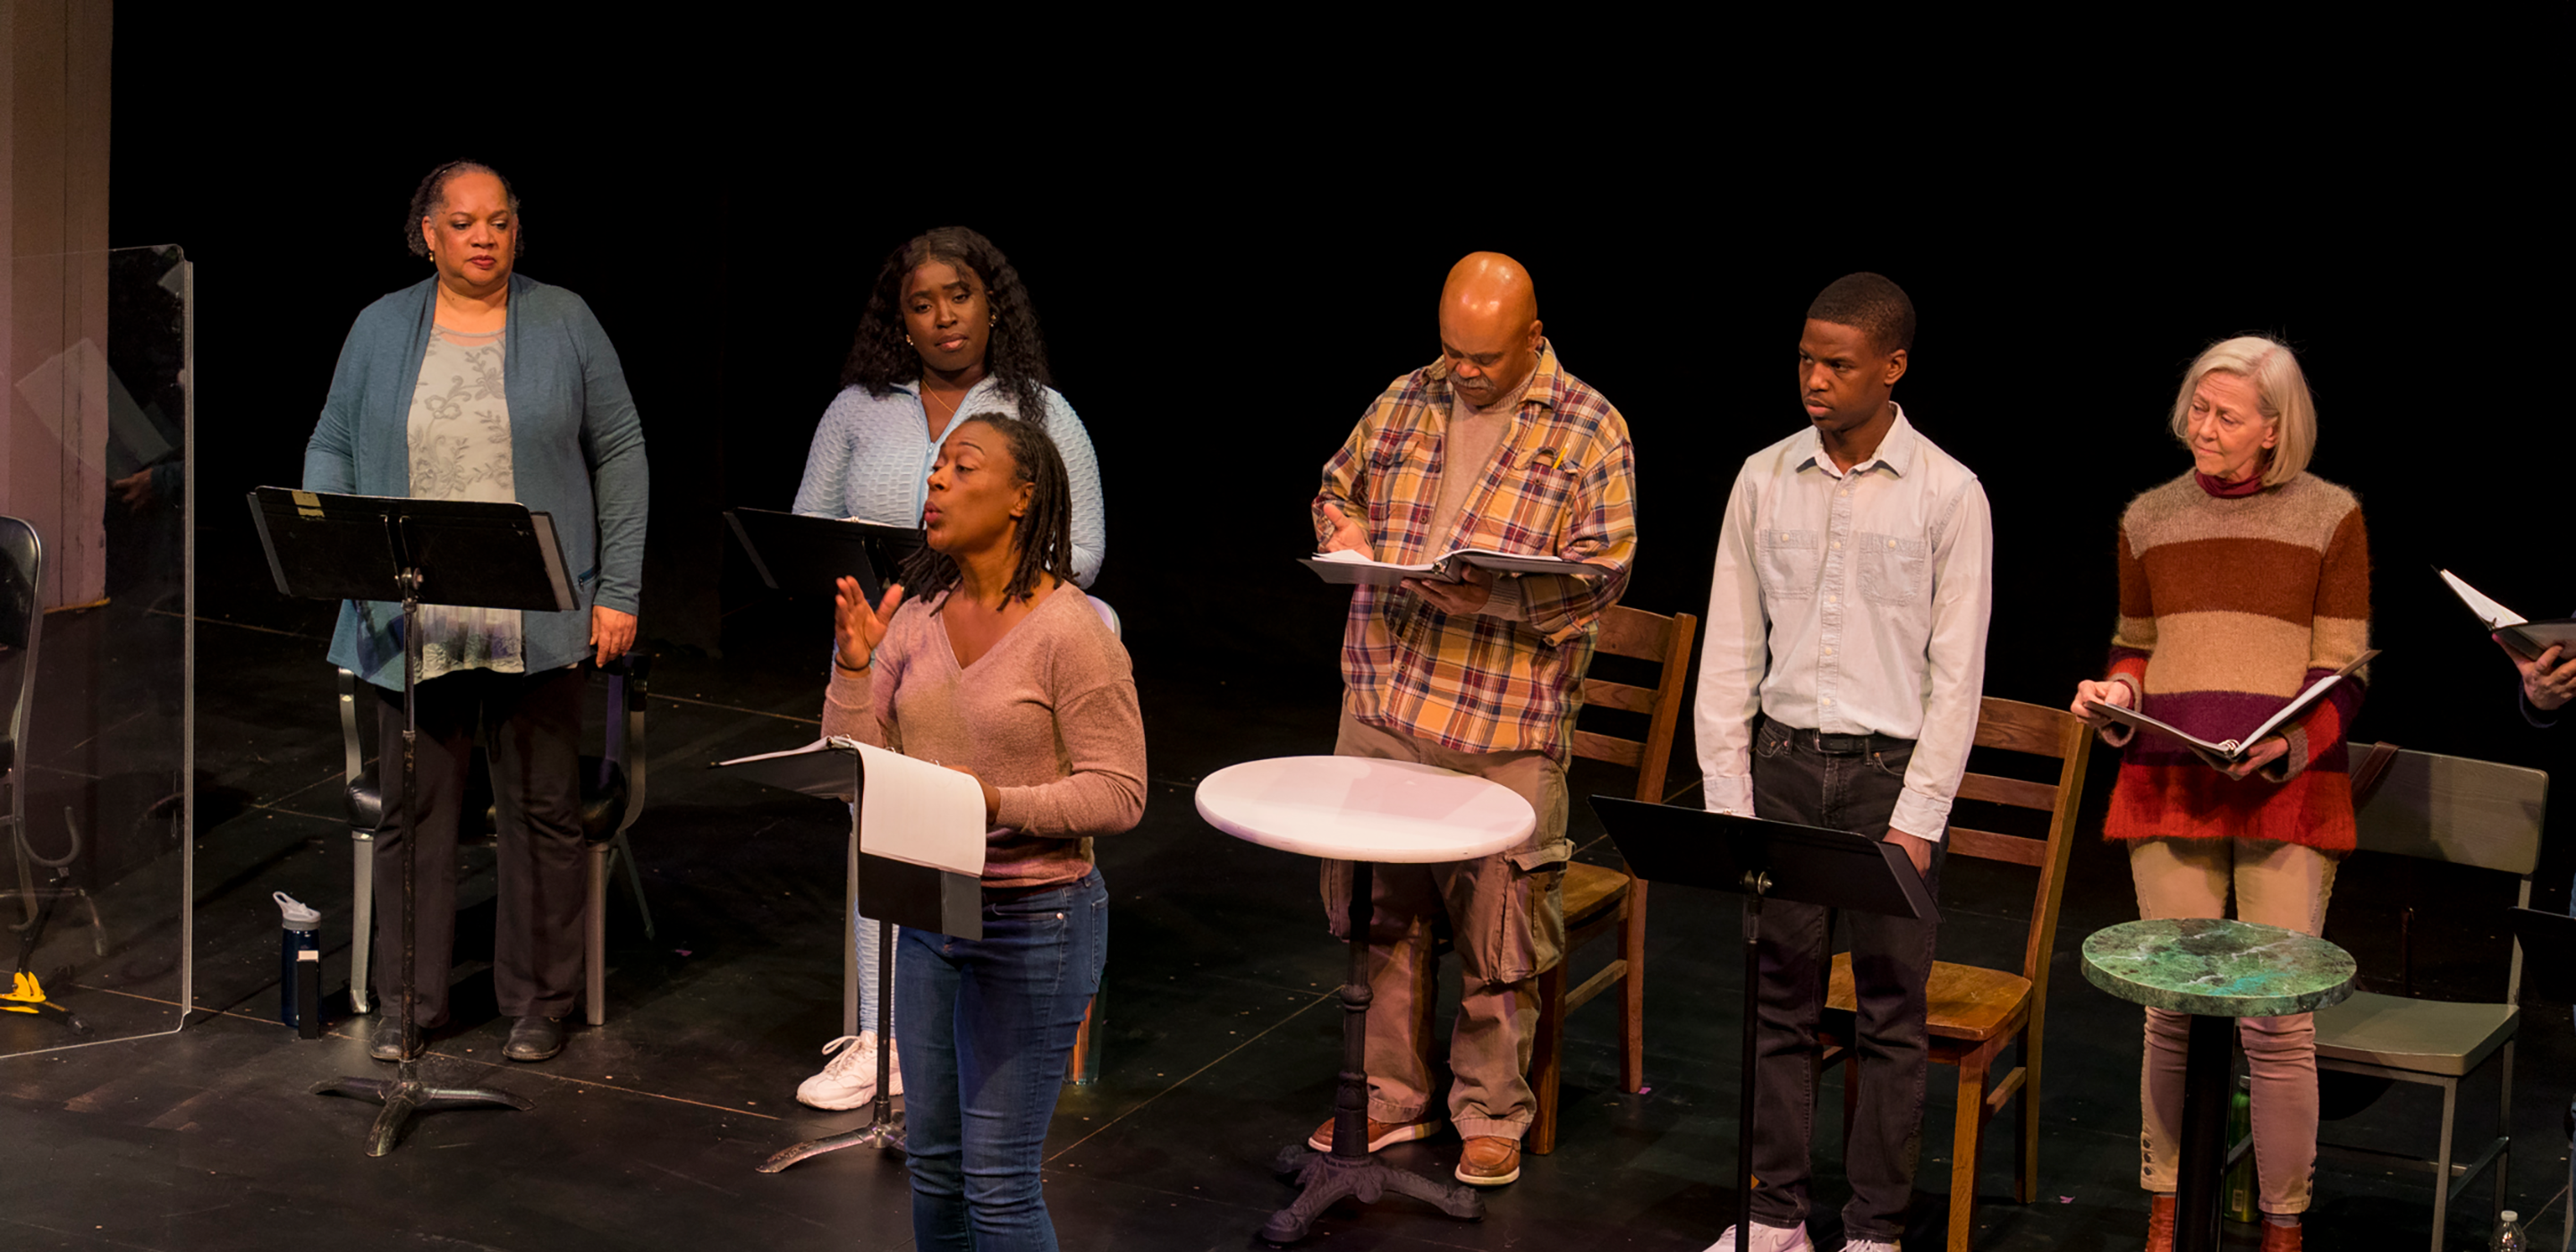 Five actors stand in a line on a stage. In front of them, music stands and tables. Some of them hold binders. At the front of the stage, a woman with short locs wearing blue jeans and a tan sweater holds a binder and speaks to the audience.